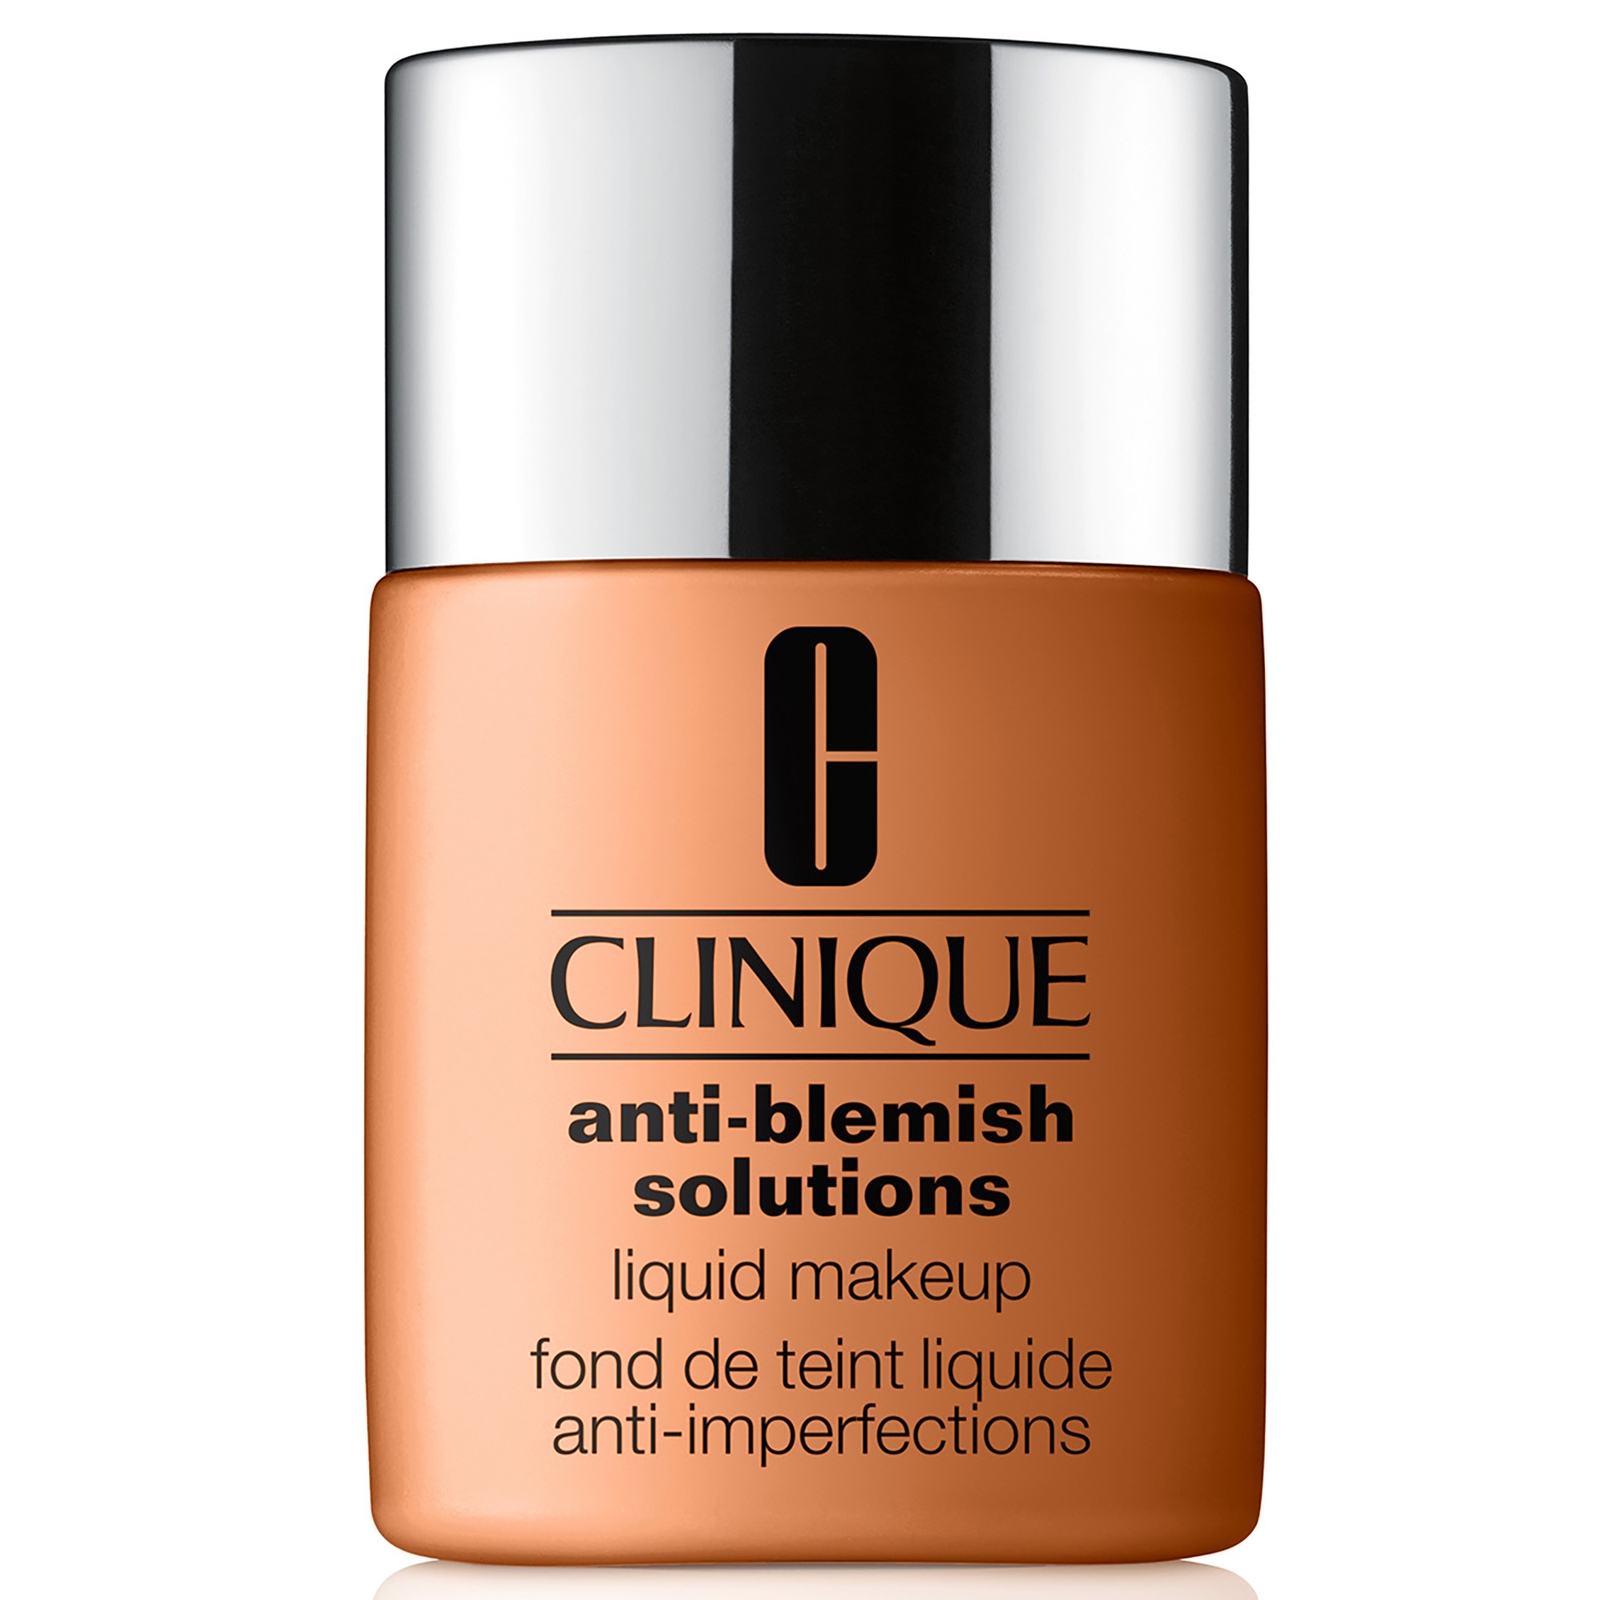 Clinique Anti-Blemish Solutions Liquid Makeup with Salicylic Acid 30ml (Various Shades) - WN 76 Toasted Wheat